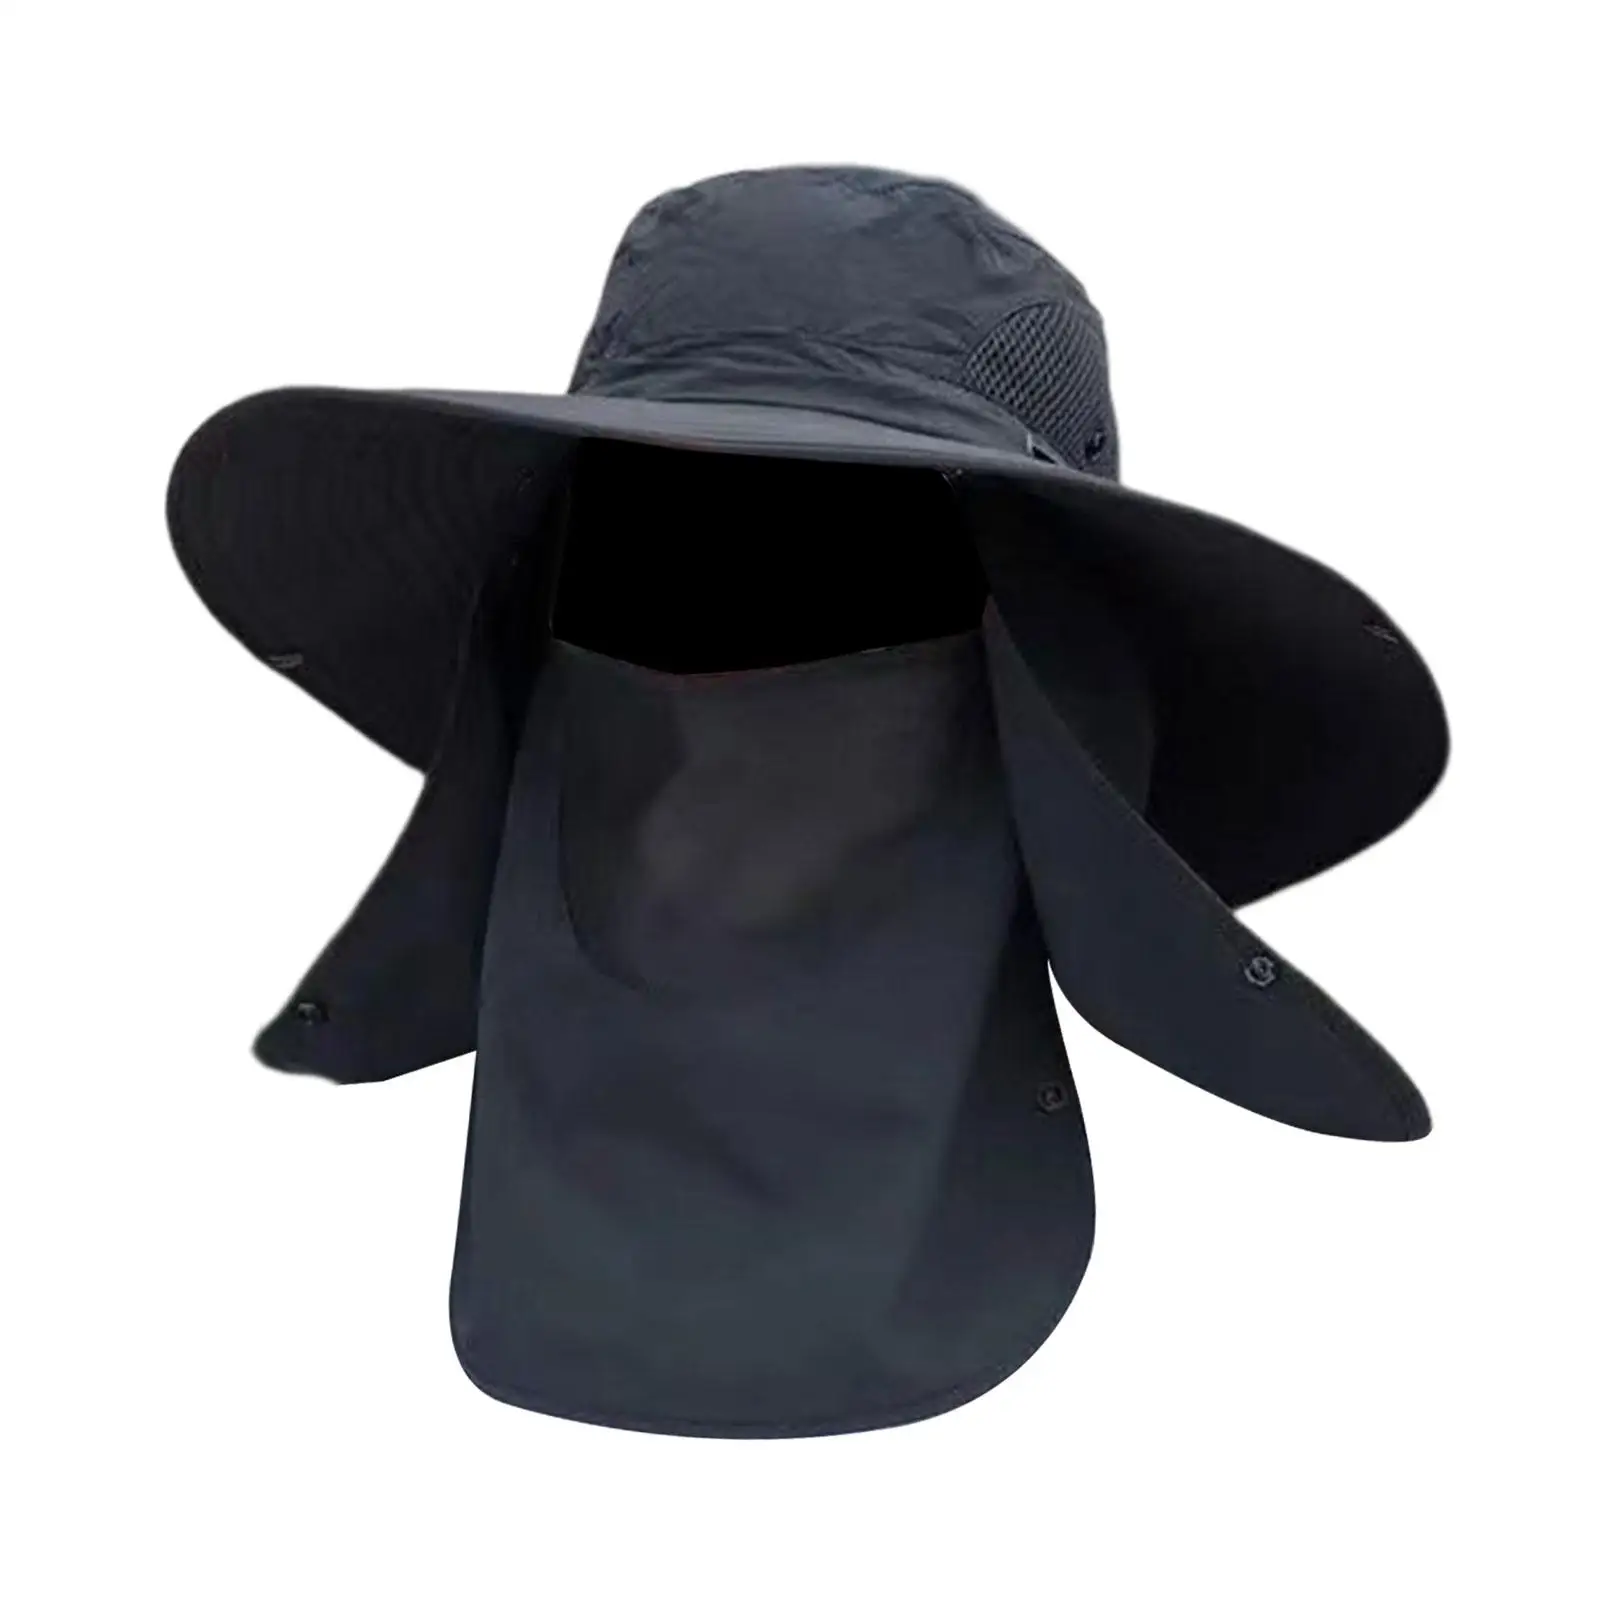 Fishing Hat Windproof Strap Outdoor Sun Cap with Detachable Face Neck Flap Cover for Gardening Women Men Climbing Backpacking